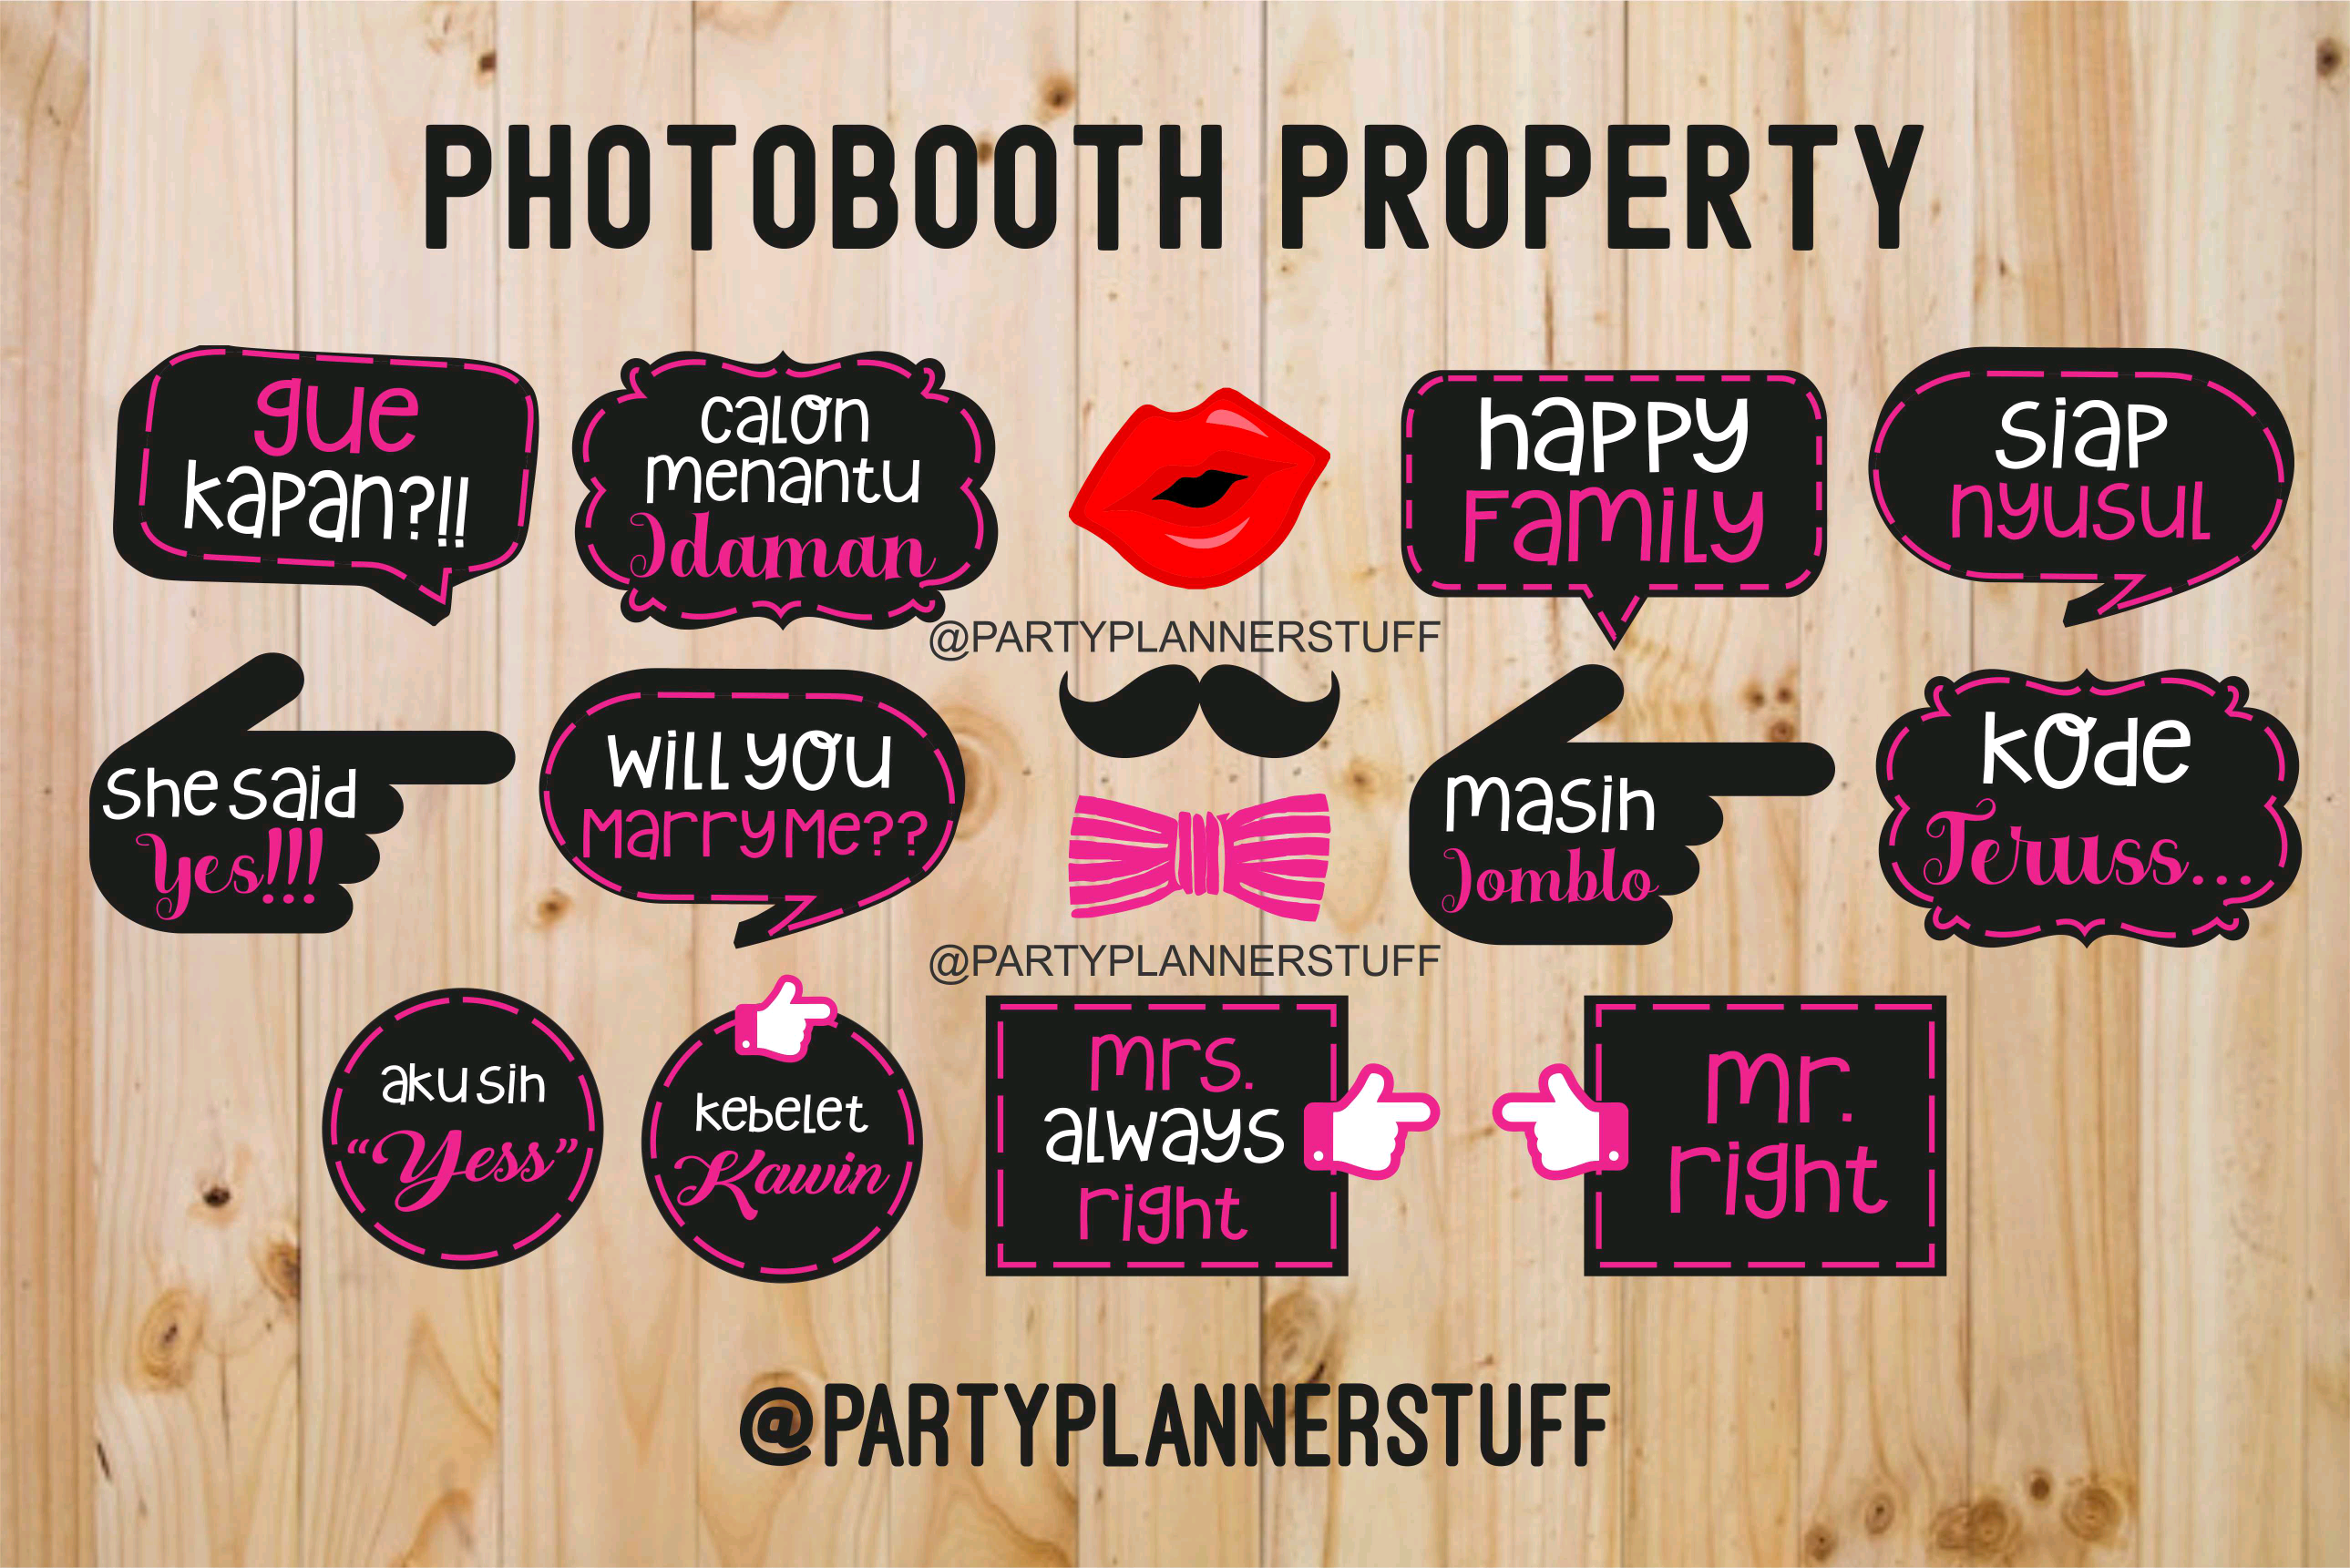 Detail Foto Booth Property Nomer 44